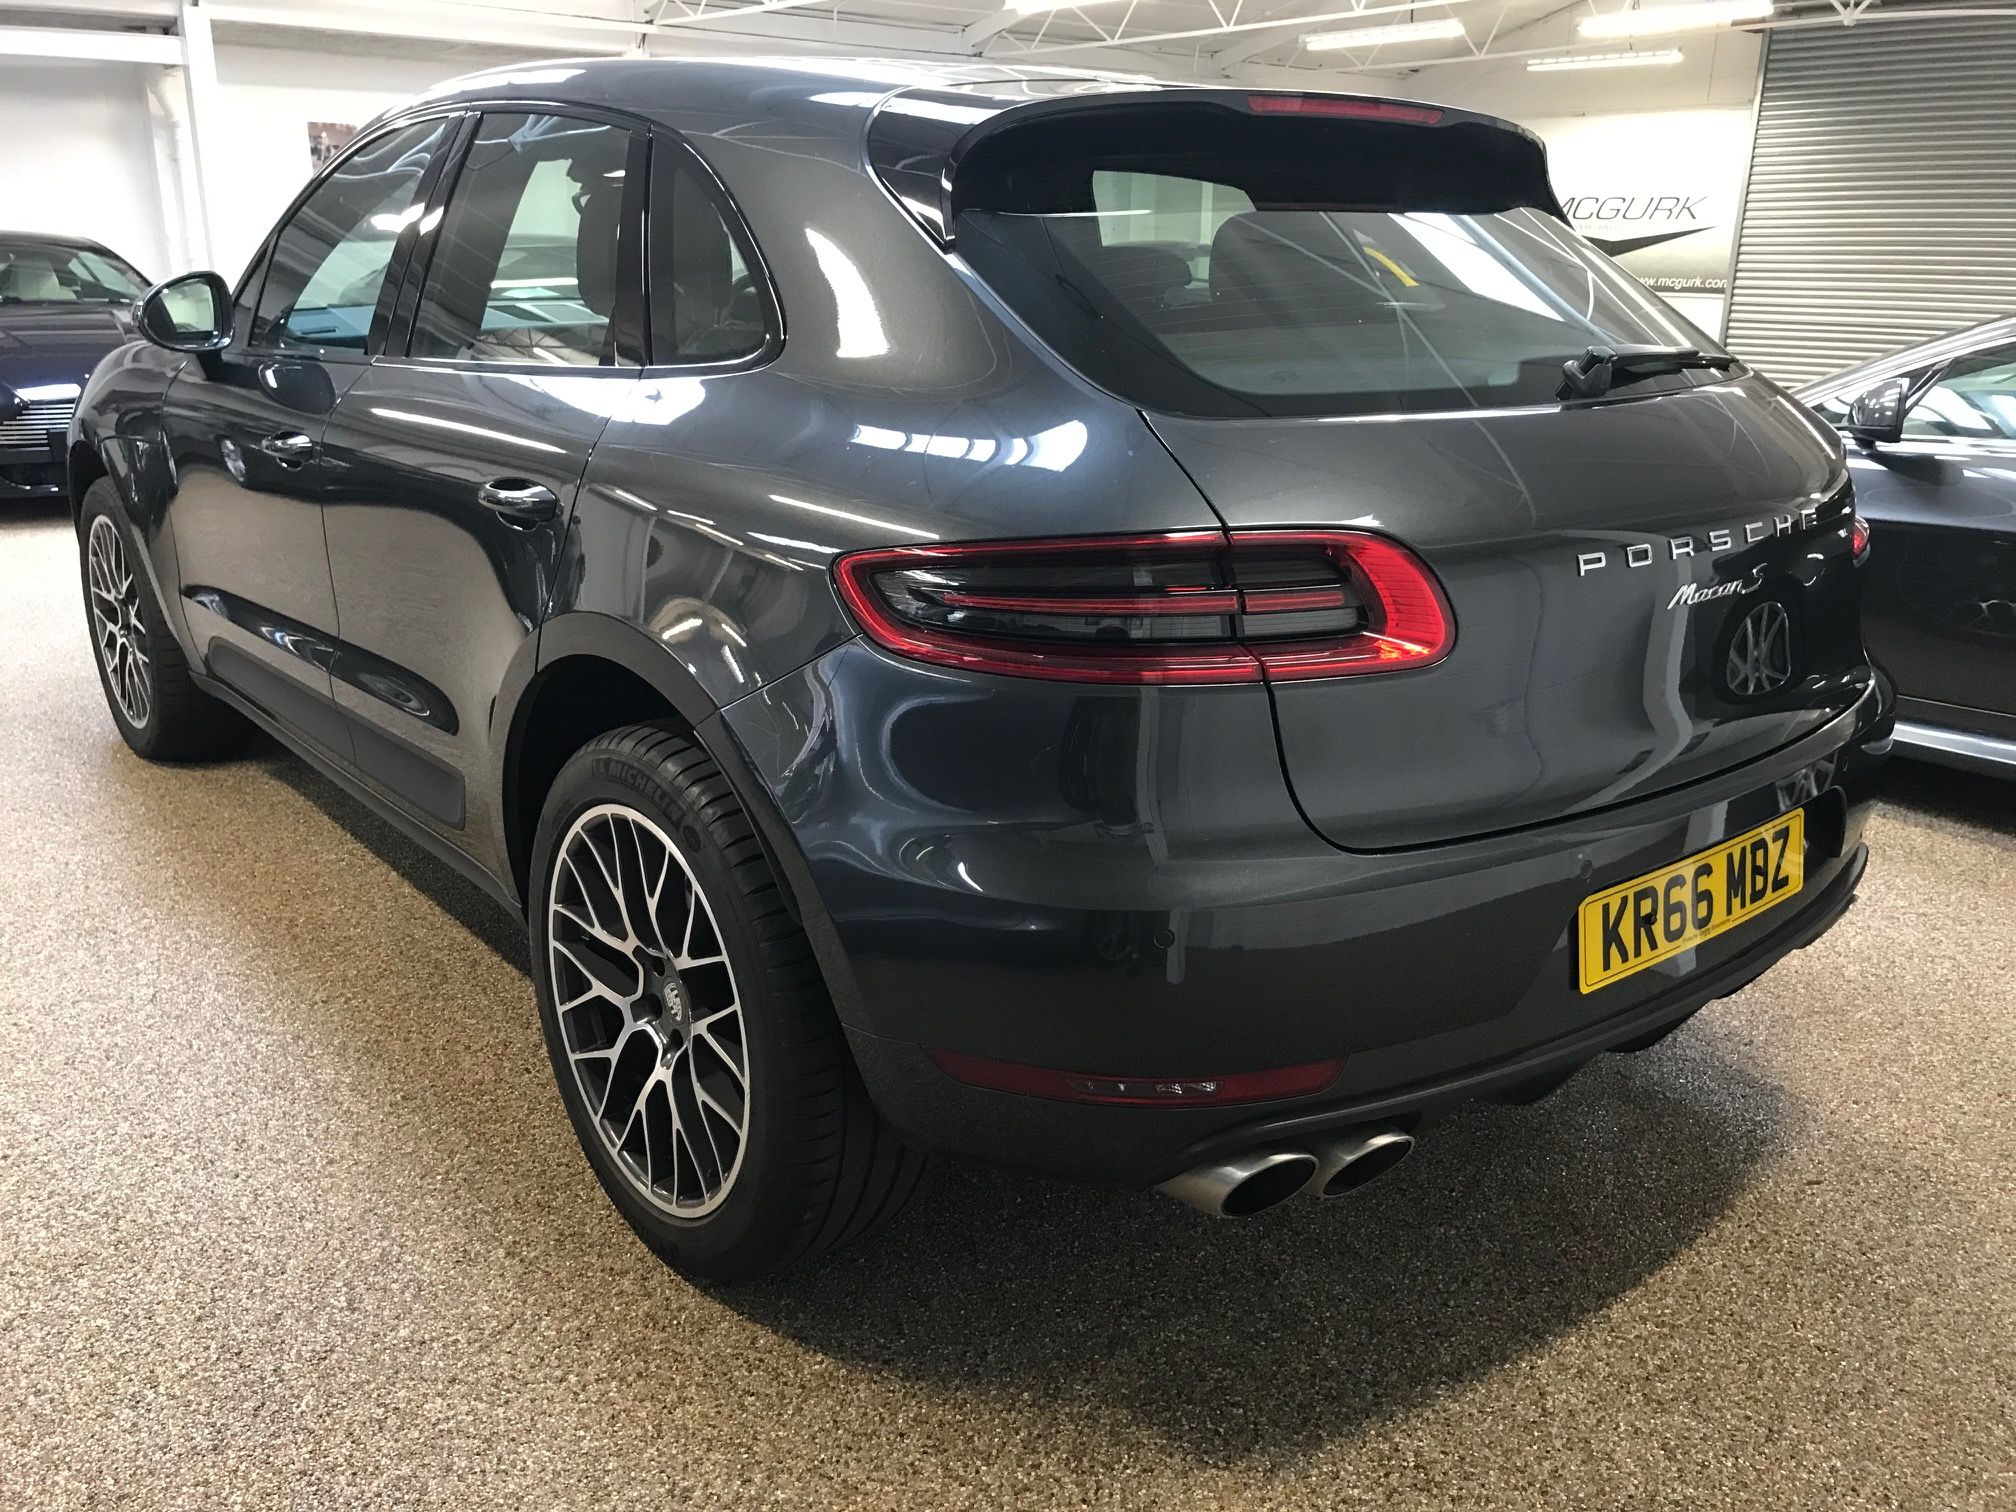 Used Porsche Macan for sale